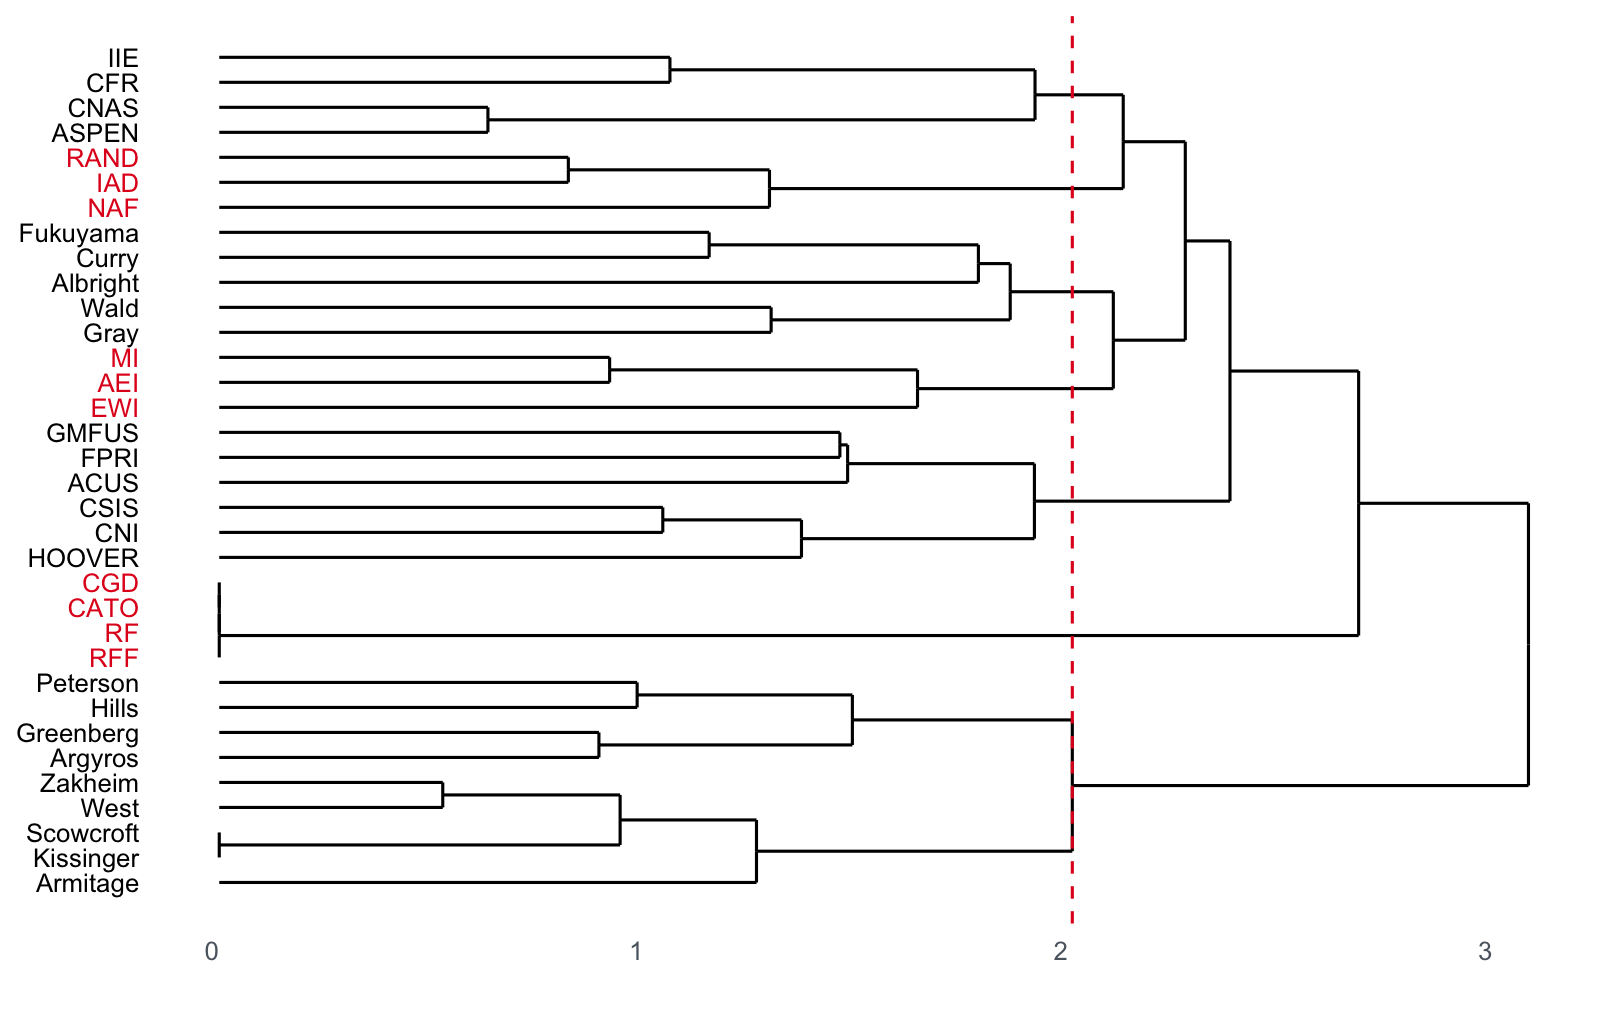 Plot of a dendrogram of structural equivalence